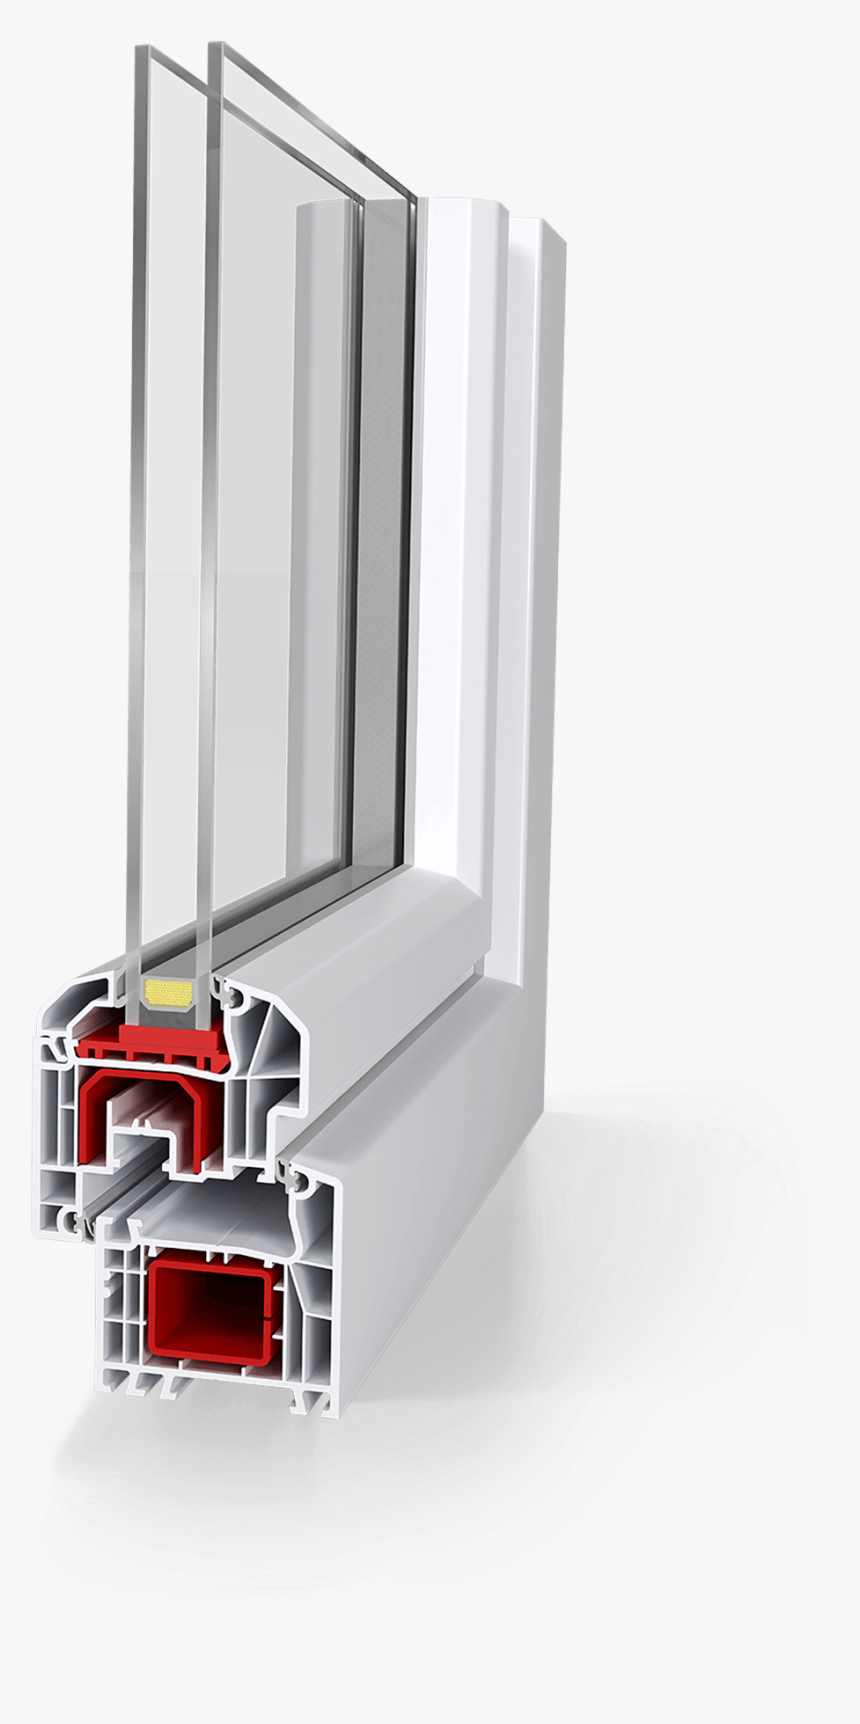 Pvc Joinery Window Systems - Fenetres Pvc Rénovation, HD Png Download, Free Download